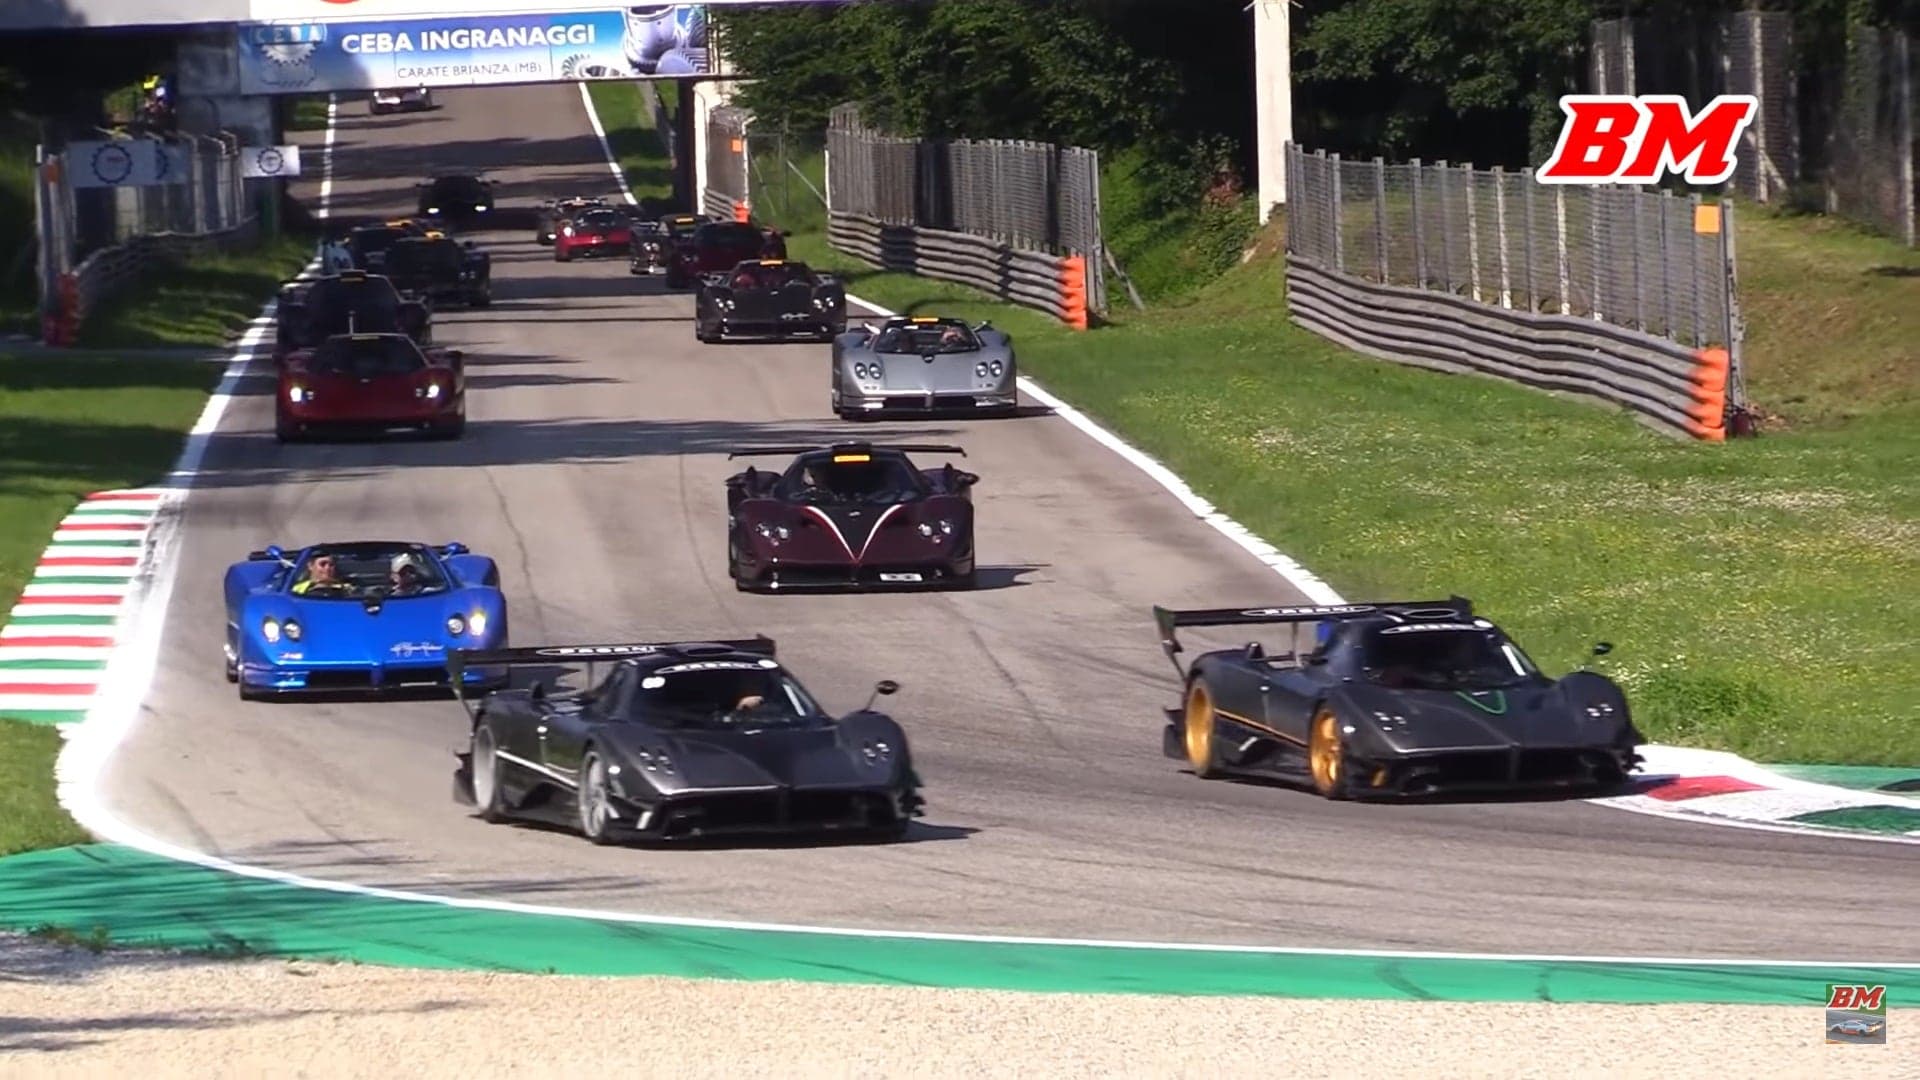 Listen to Over 40 Pagani Zonda and Huayra Supercars Storm the Historic Monza Circuit